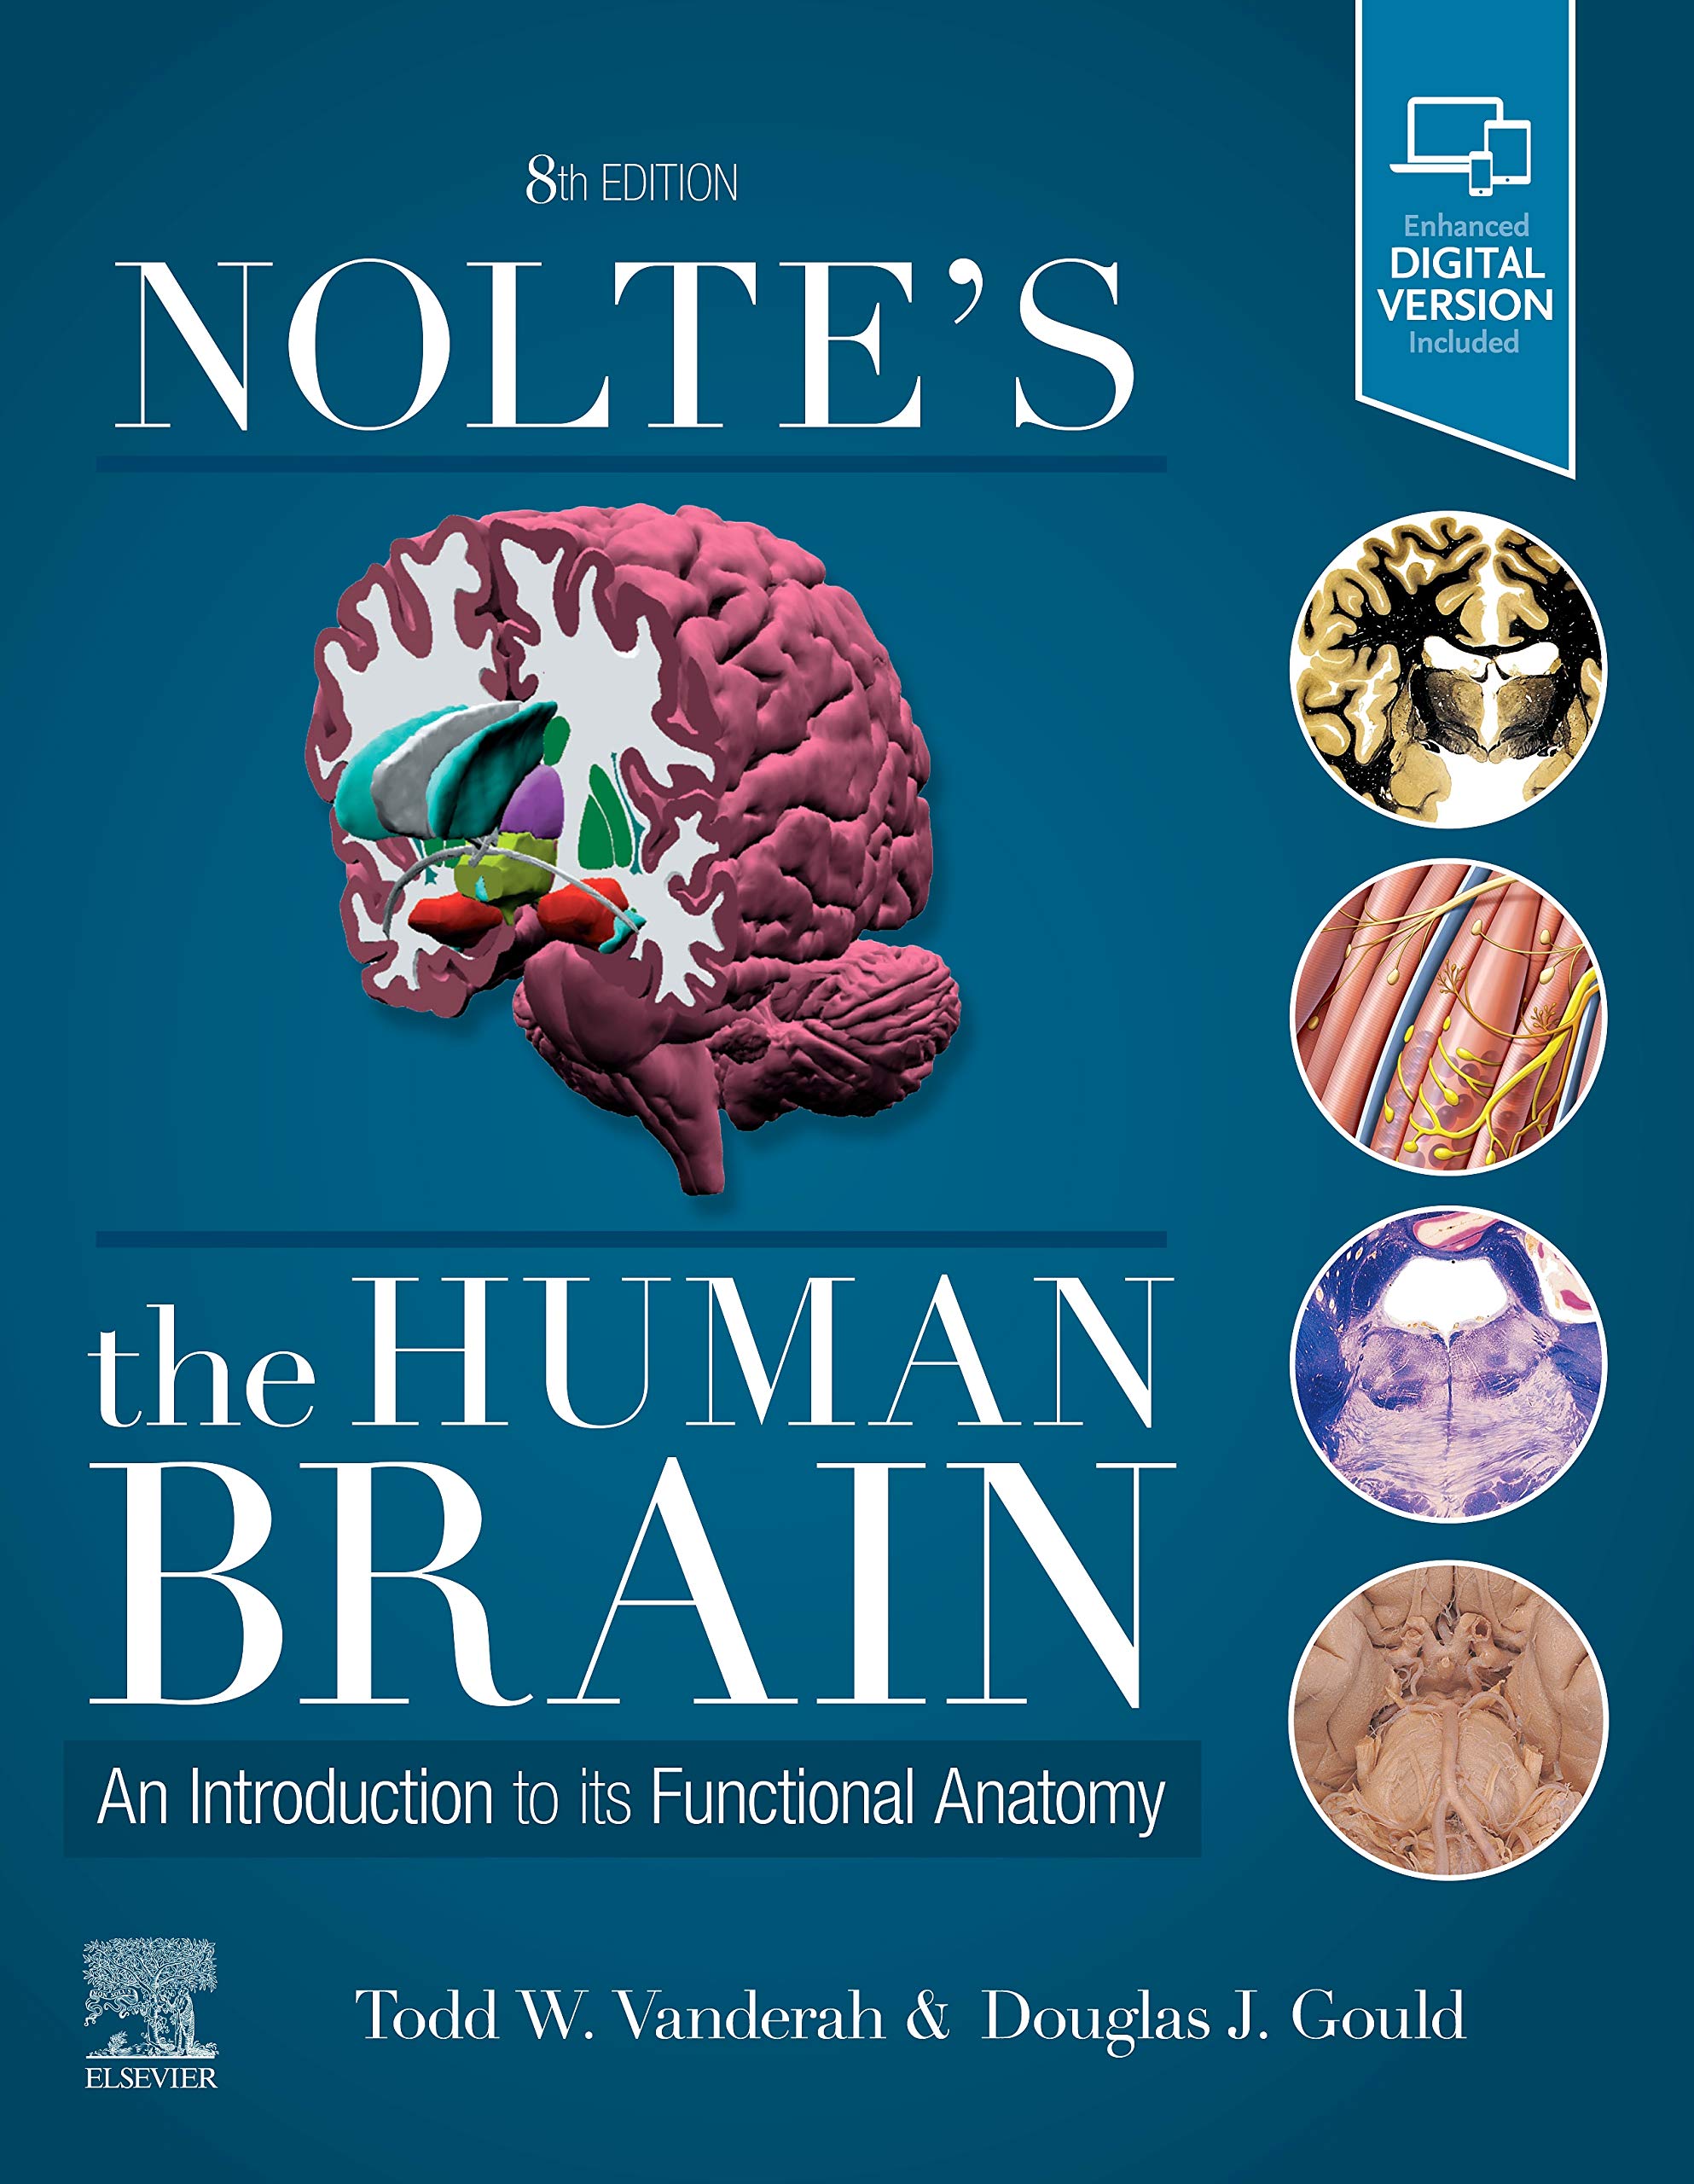 noltes-the-human-brain-an-introduction-to-its-functional-anatomy-8e